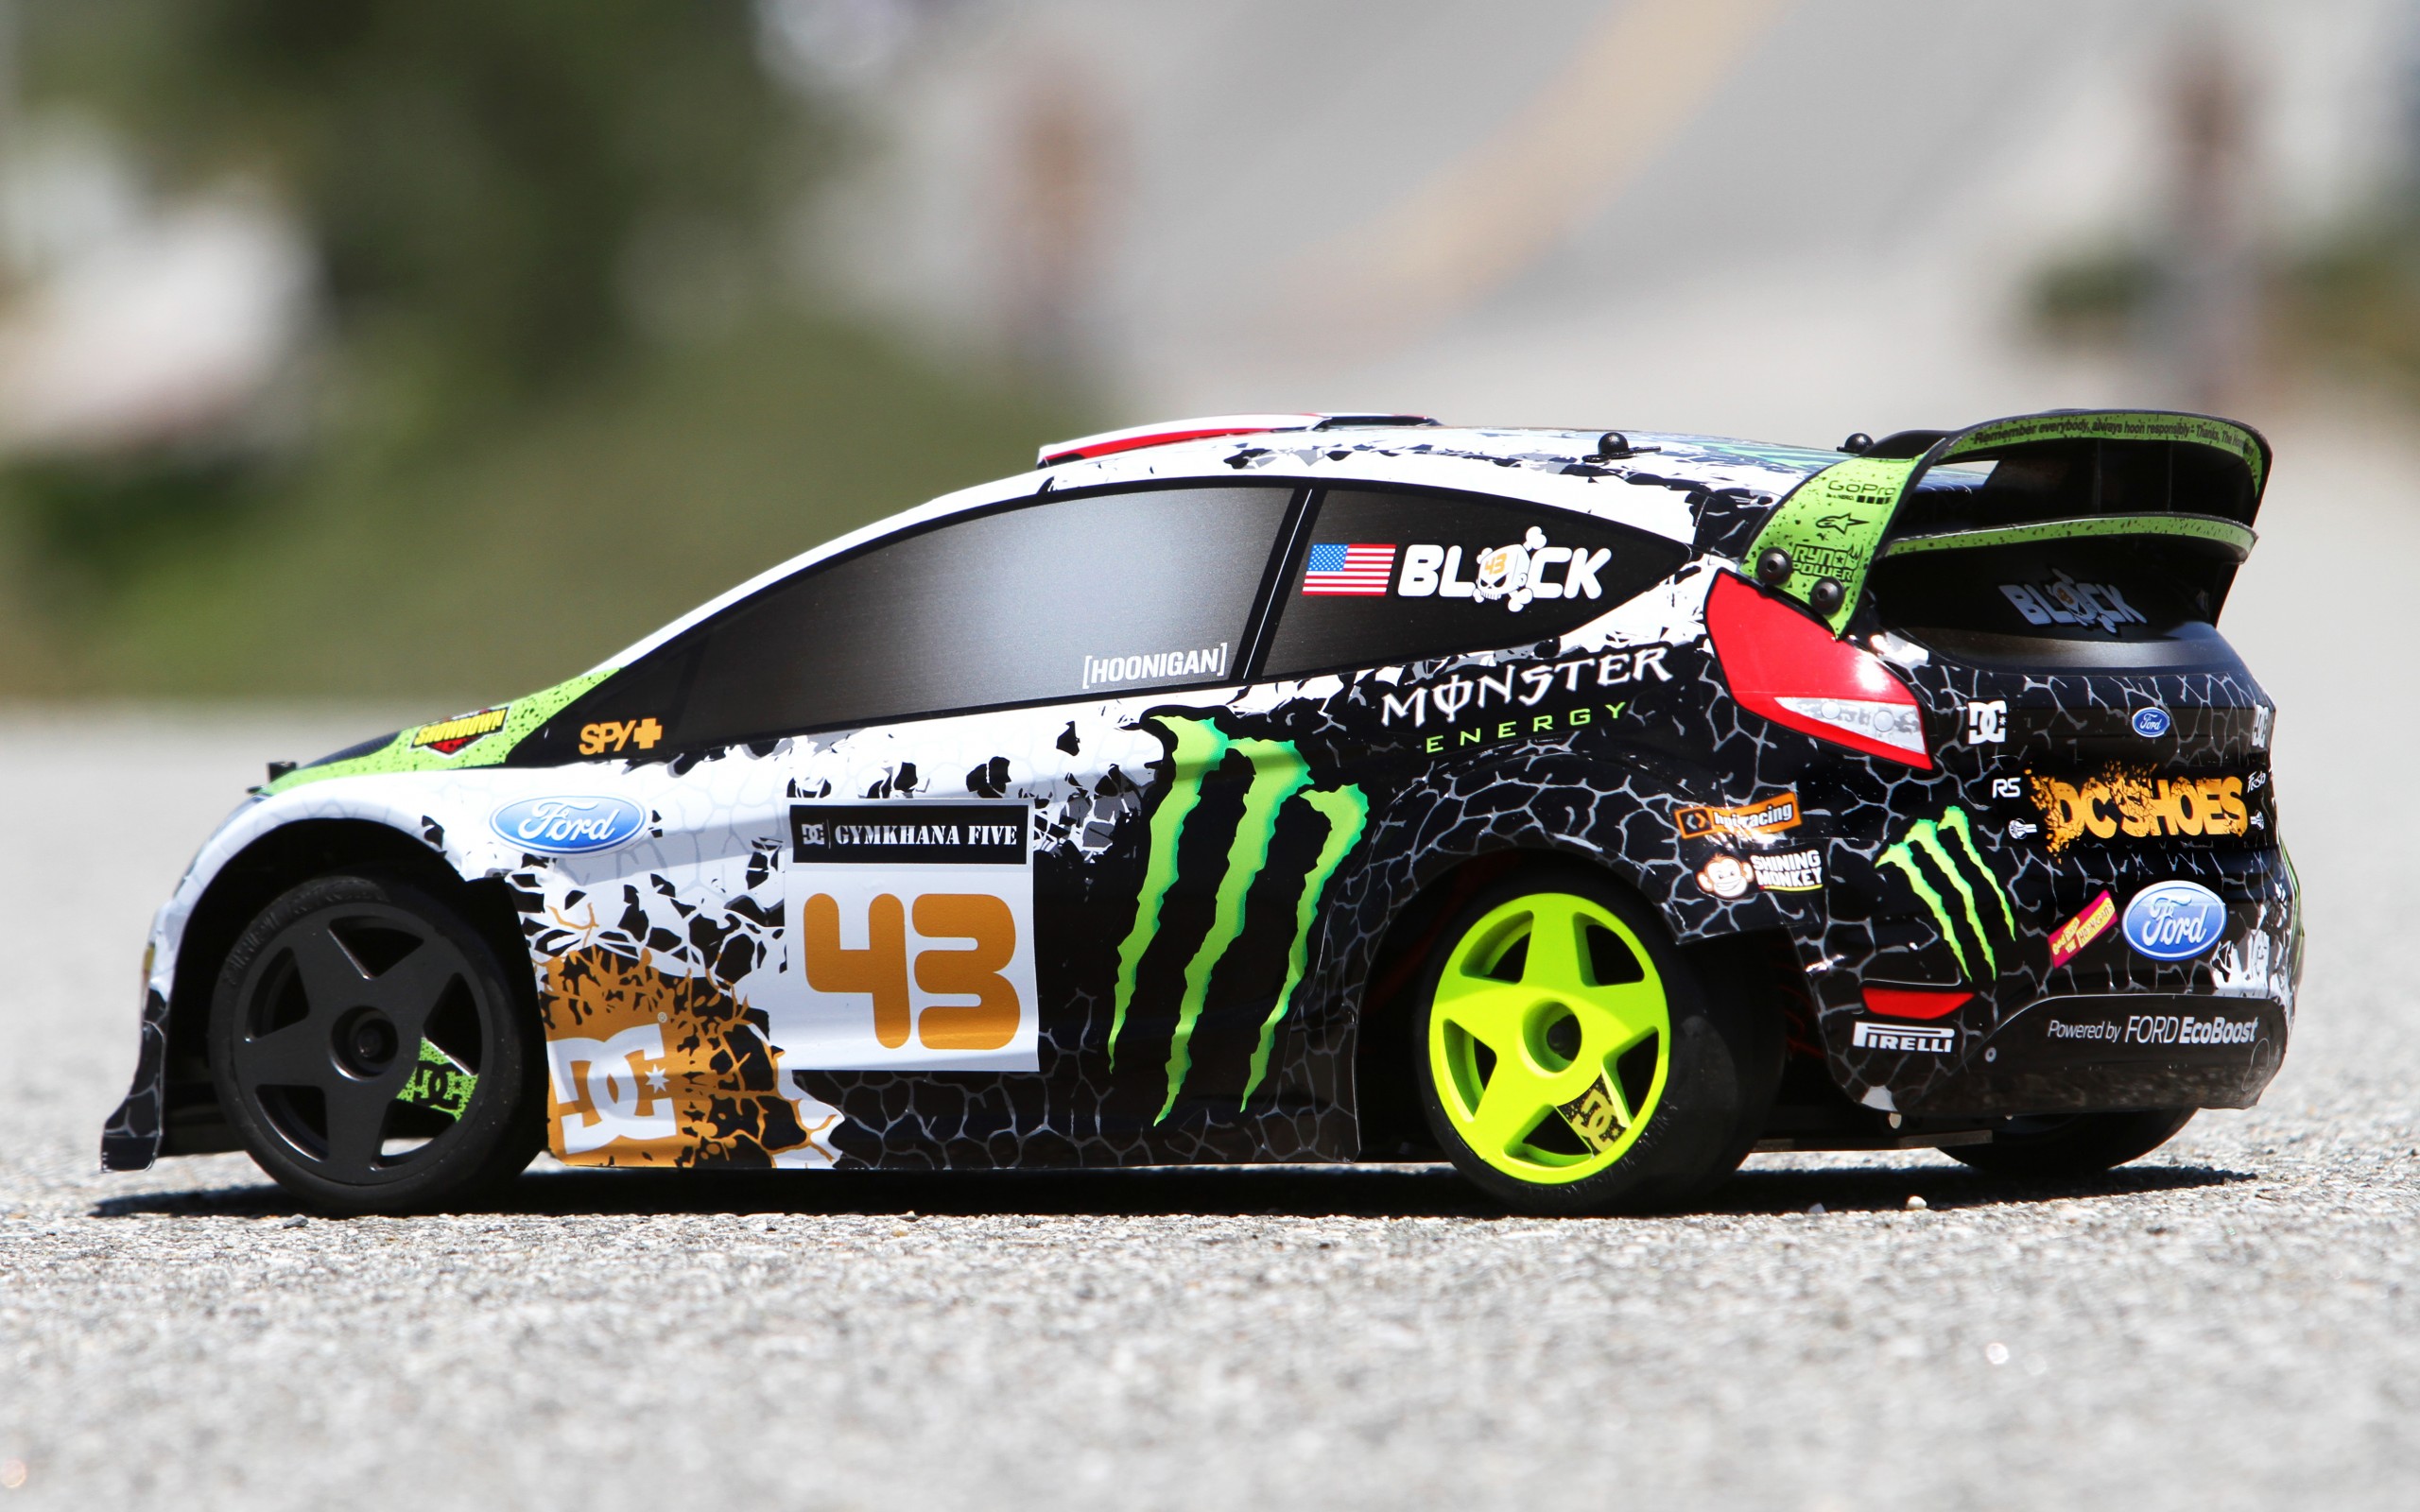 Ford Fiesta Car Ken Block Drift Race Racing Toy Toys Wallpapers Hd Desktop And Mobile Backgrounds